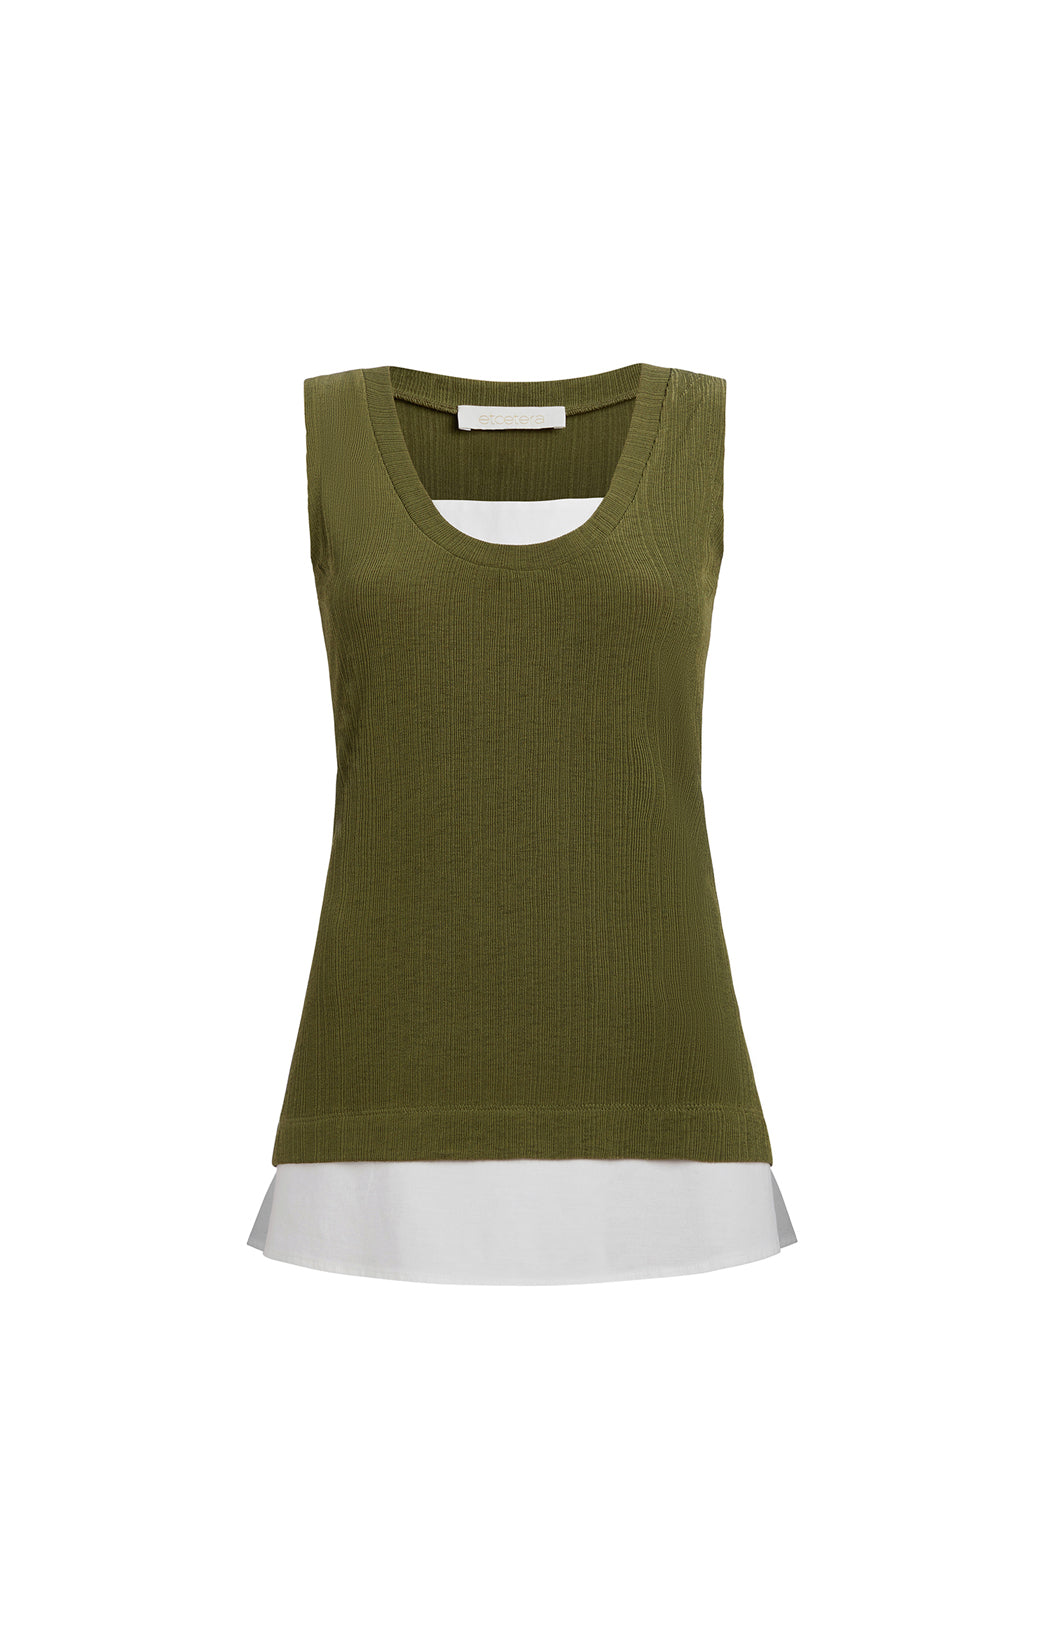 Areca - High-Low Knit Tunic With Side Slits - Product Image